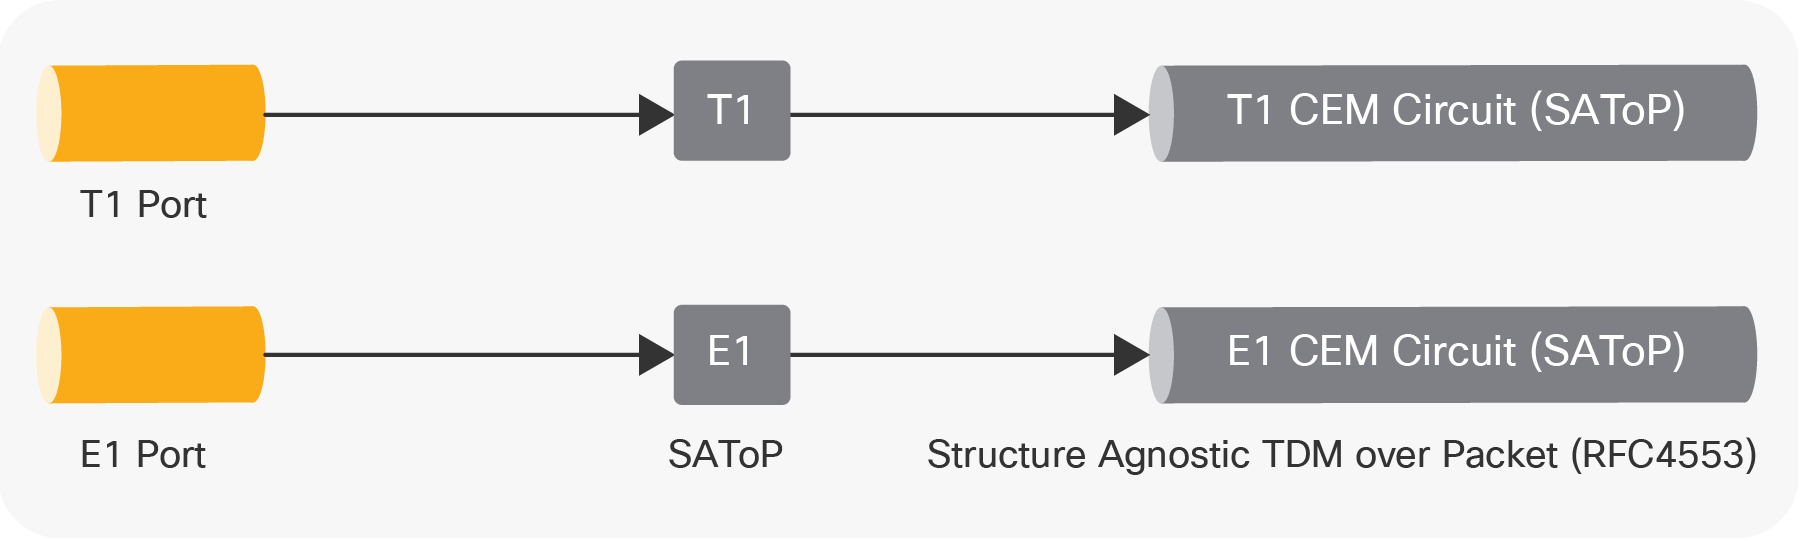 Supported CEM Types for T1/E1